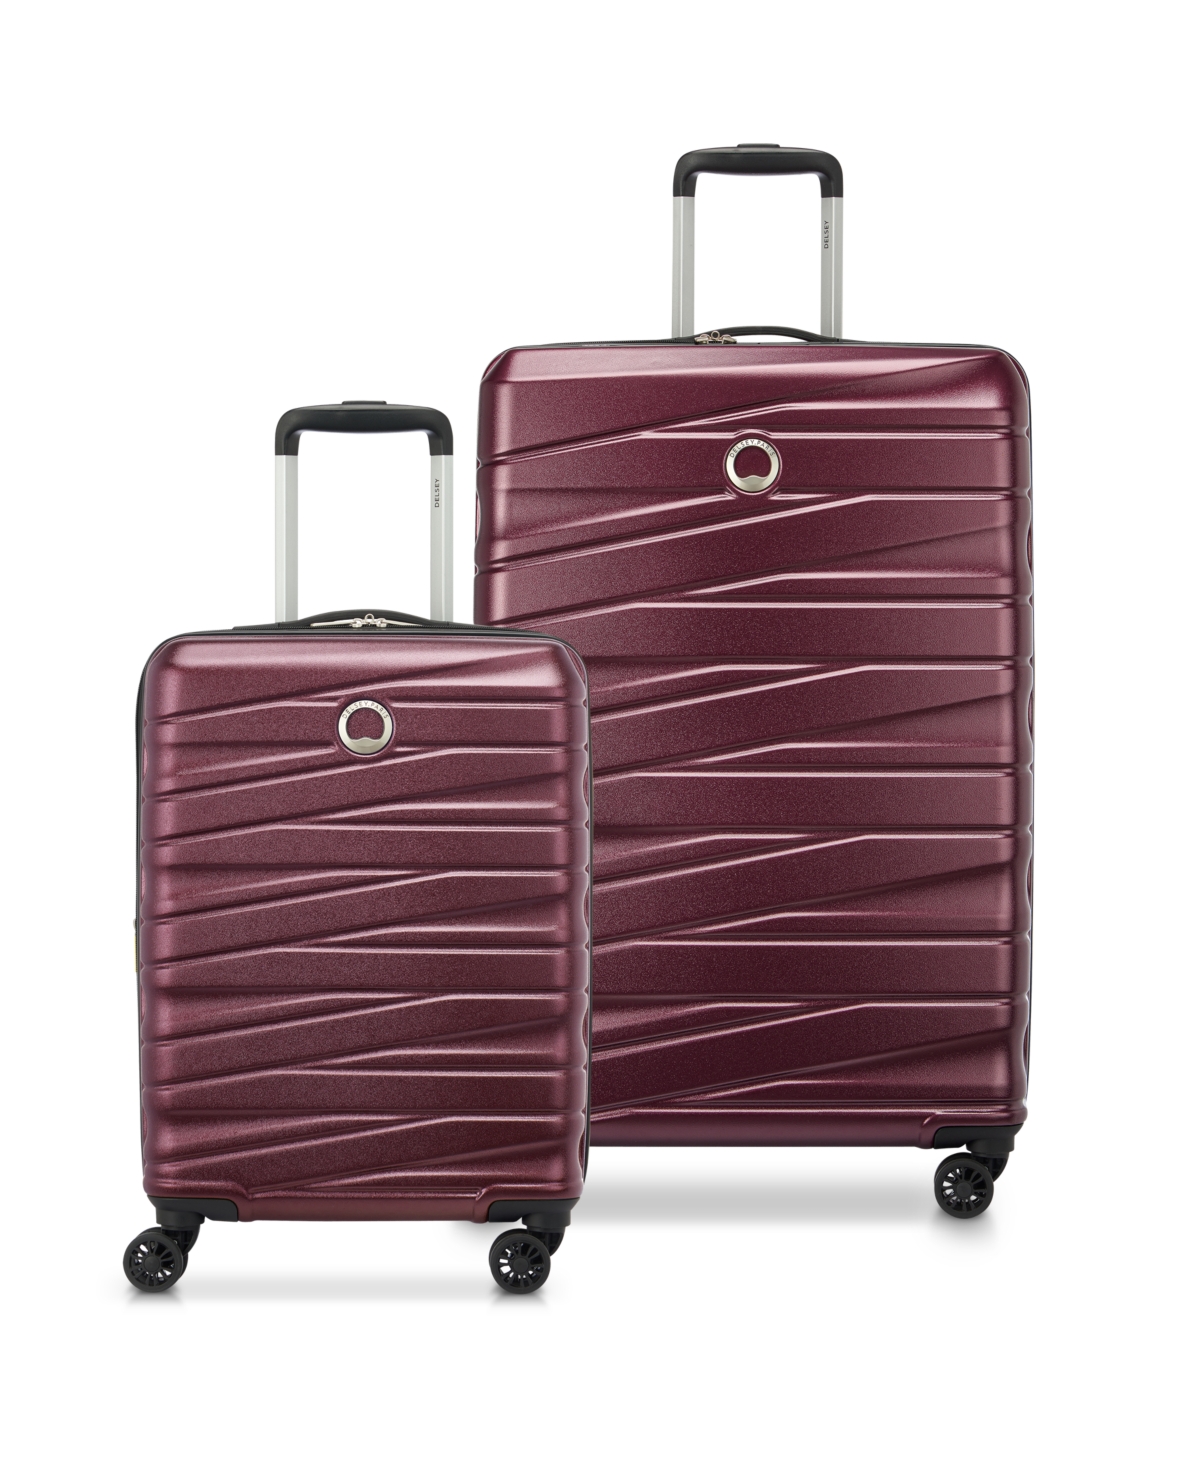 Delsey Cannes 2 Piece Hardside Luggage Set, Carry-on And 27" Spinner In Burgundy